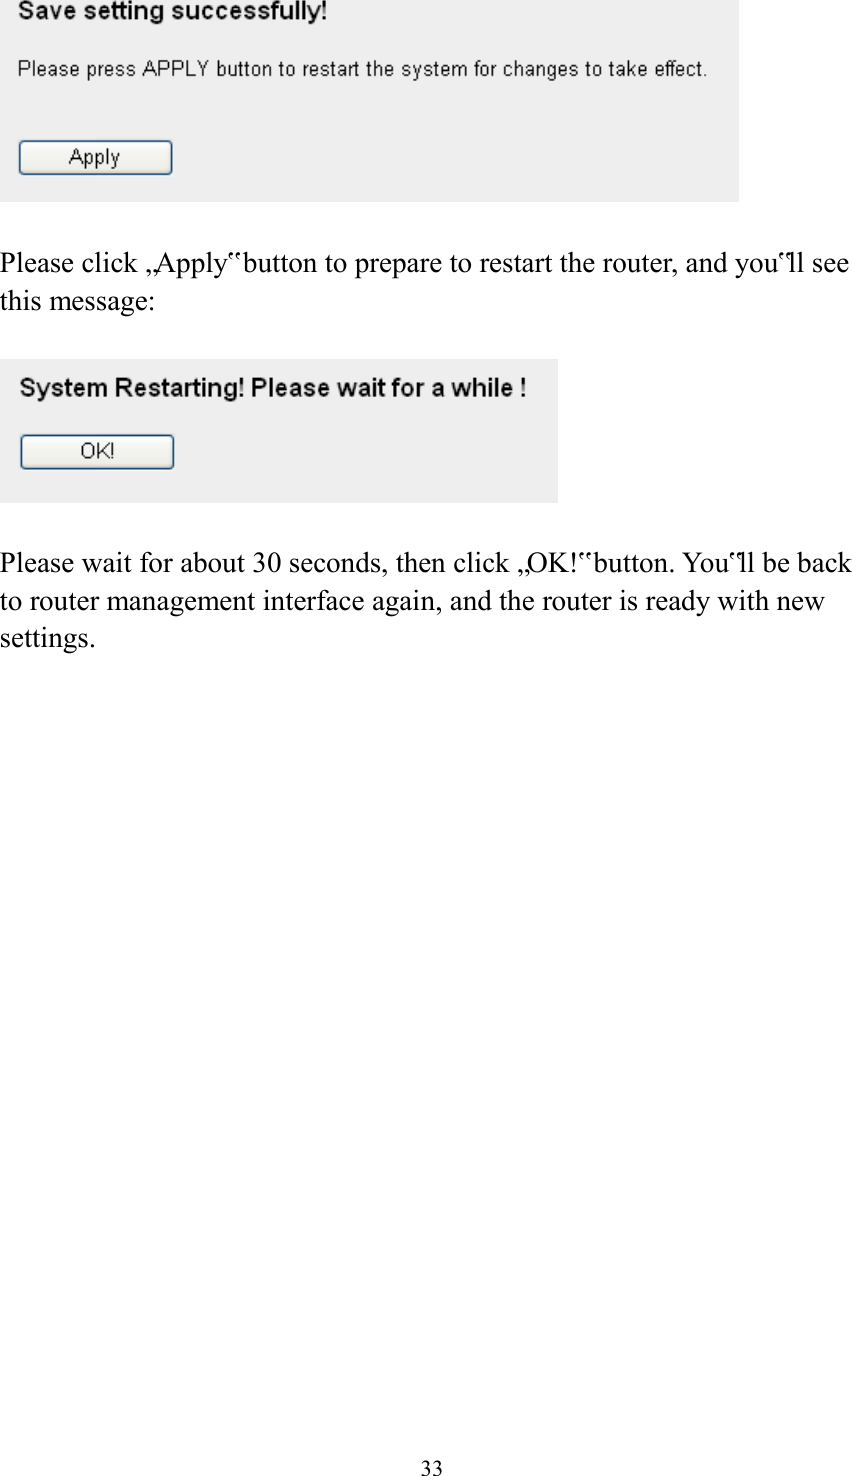  33   Please click „Apply‟ button to prepare to restart the router, and you‟ll see this message:    Please wait for about 30 seconds, then click „OK!‟ button. Yo u‟ll be back to router management interface again, and the router is ready with new settings. 